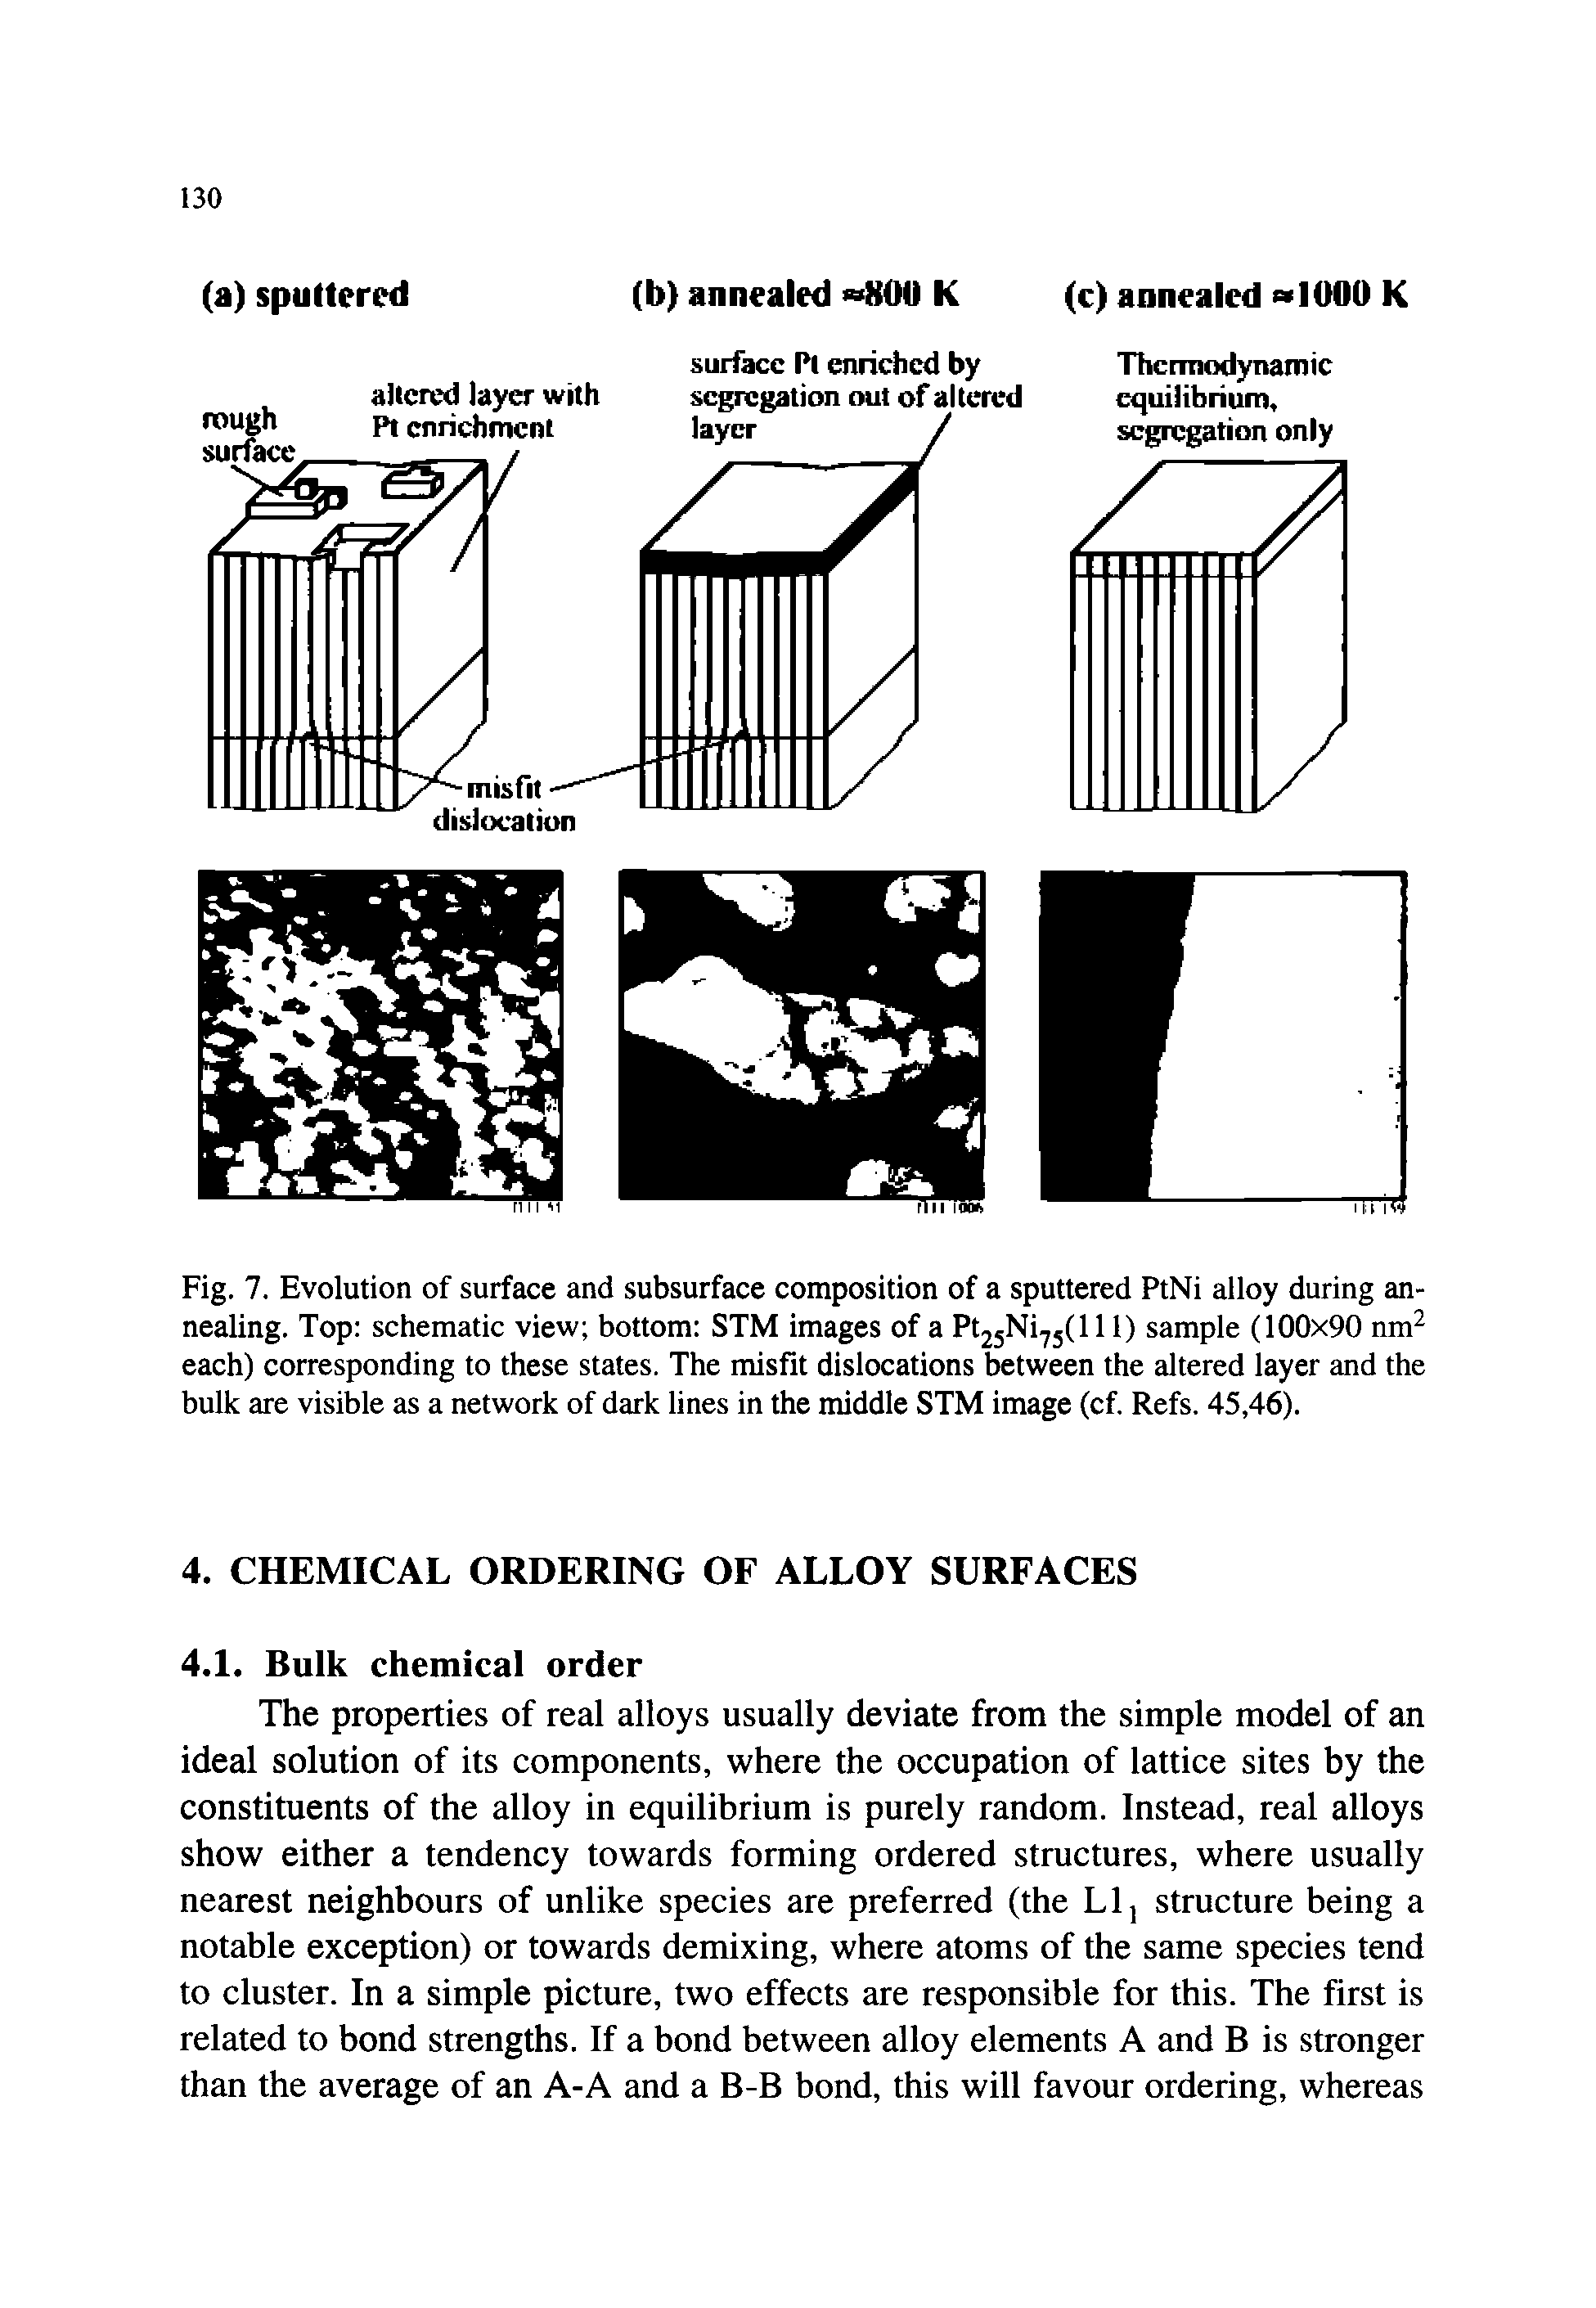 Fig. 7. Evolution of surface and subsurface composition of a sputtered PtNi alloy during annealing. Top schematic view bottom STM images of a Pt25Ni75(lll) sample (100x90 nm each) corresponding to these states. The misfit dislocations between the altered layer and the bulk are visible as a network of dark lines in the middle STM image (cf. Refs. 45,46).